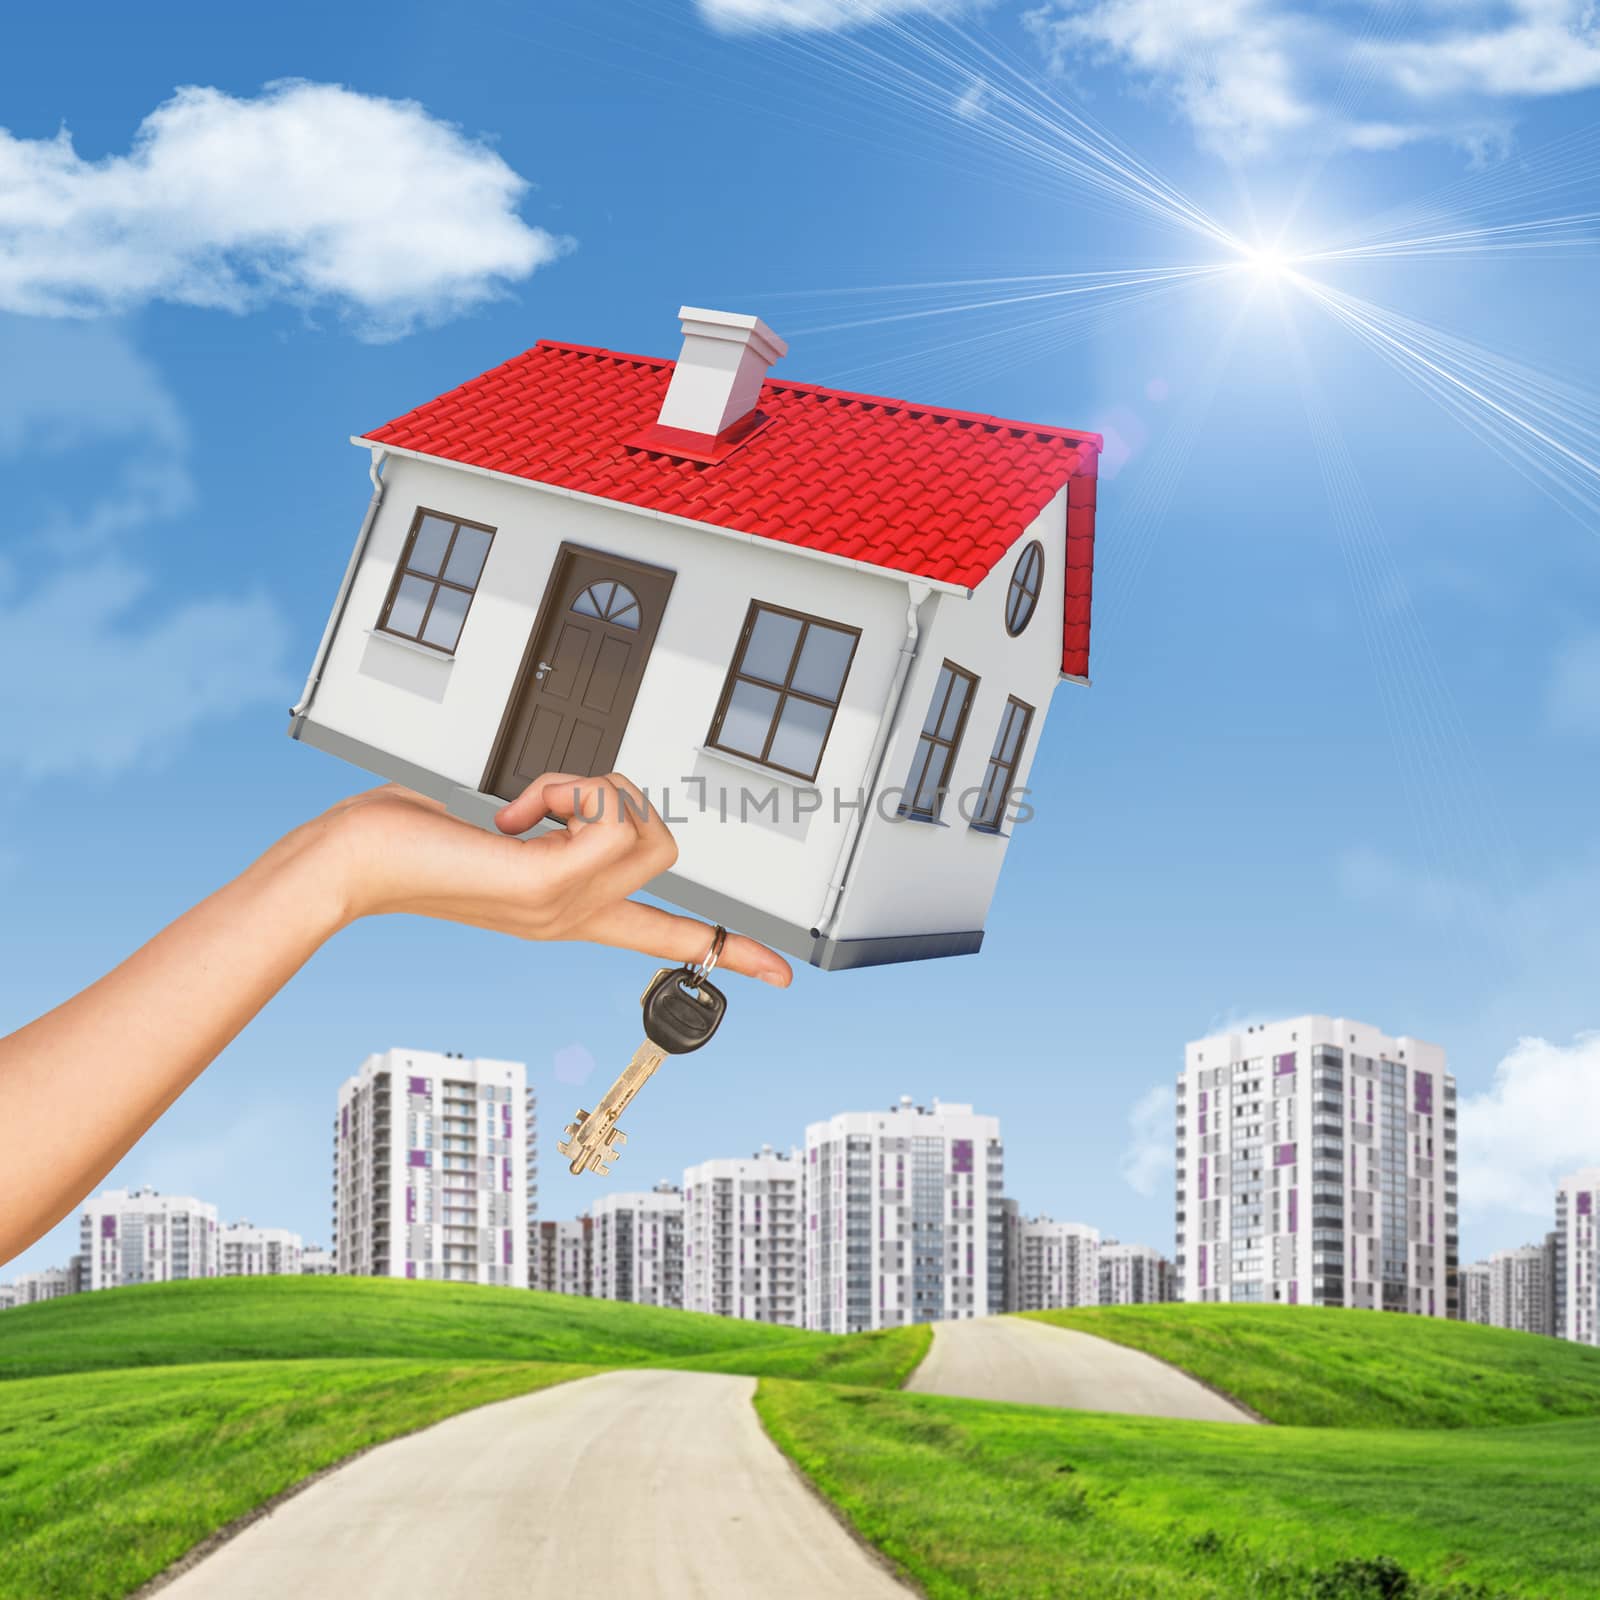 House and keys in womans hand on cityscape background with blue sky